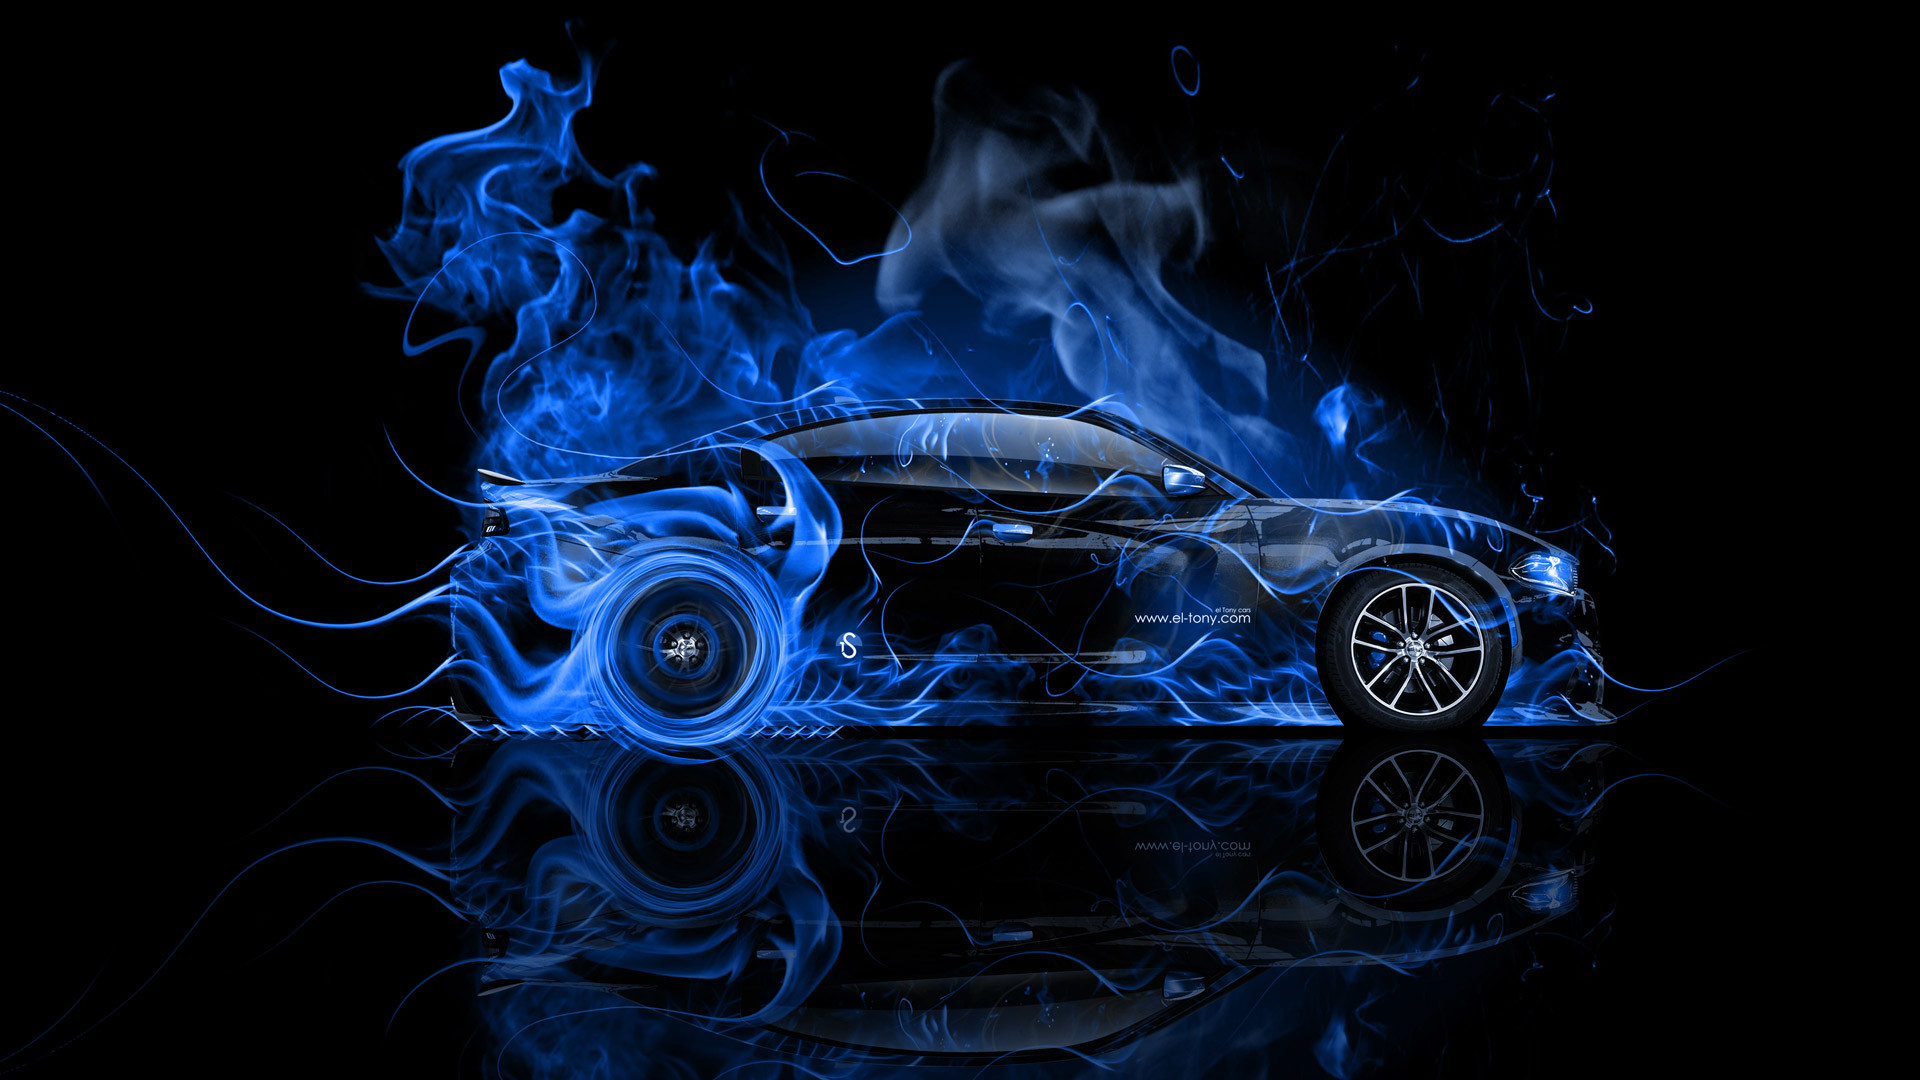 1920x1080 Dodge-Charger-RT-Muscle-Side-Blue-Fire-Abstract-Car-2014-Art-HD-Wallpapers-design-by-Tony-Kokhan-www.el-tony.com_.jpg  (1920Ã1080) | Dodge Chargers ...